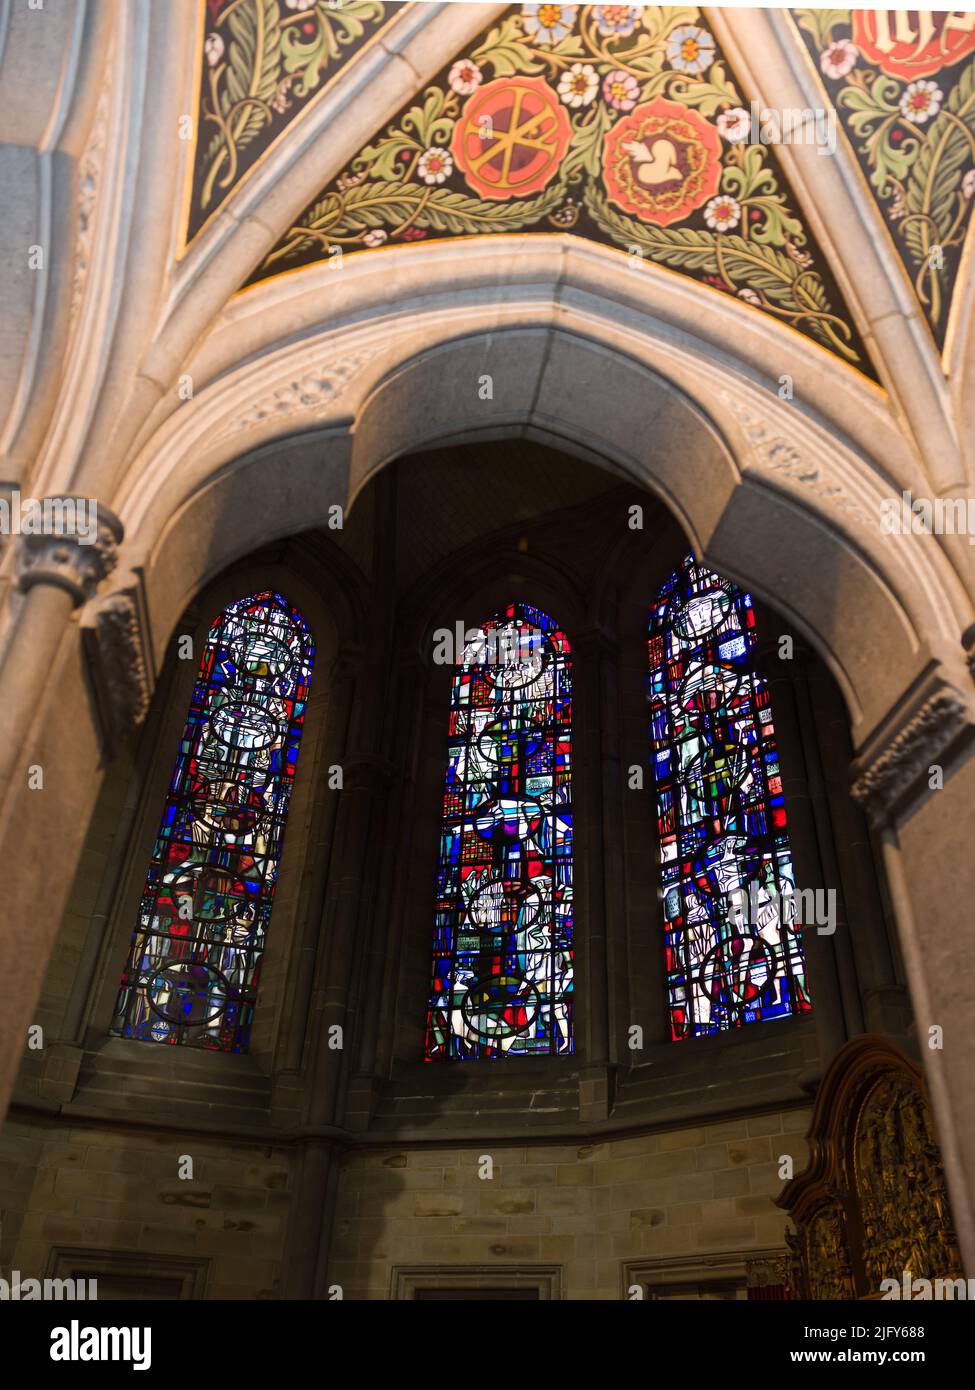 Stained glass in Ypres St. Martin's Cathedral the restored medieval church after its destruction in WWI Stock Photo